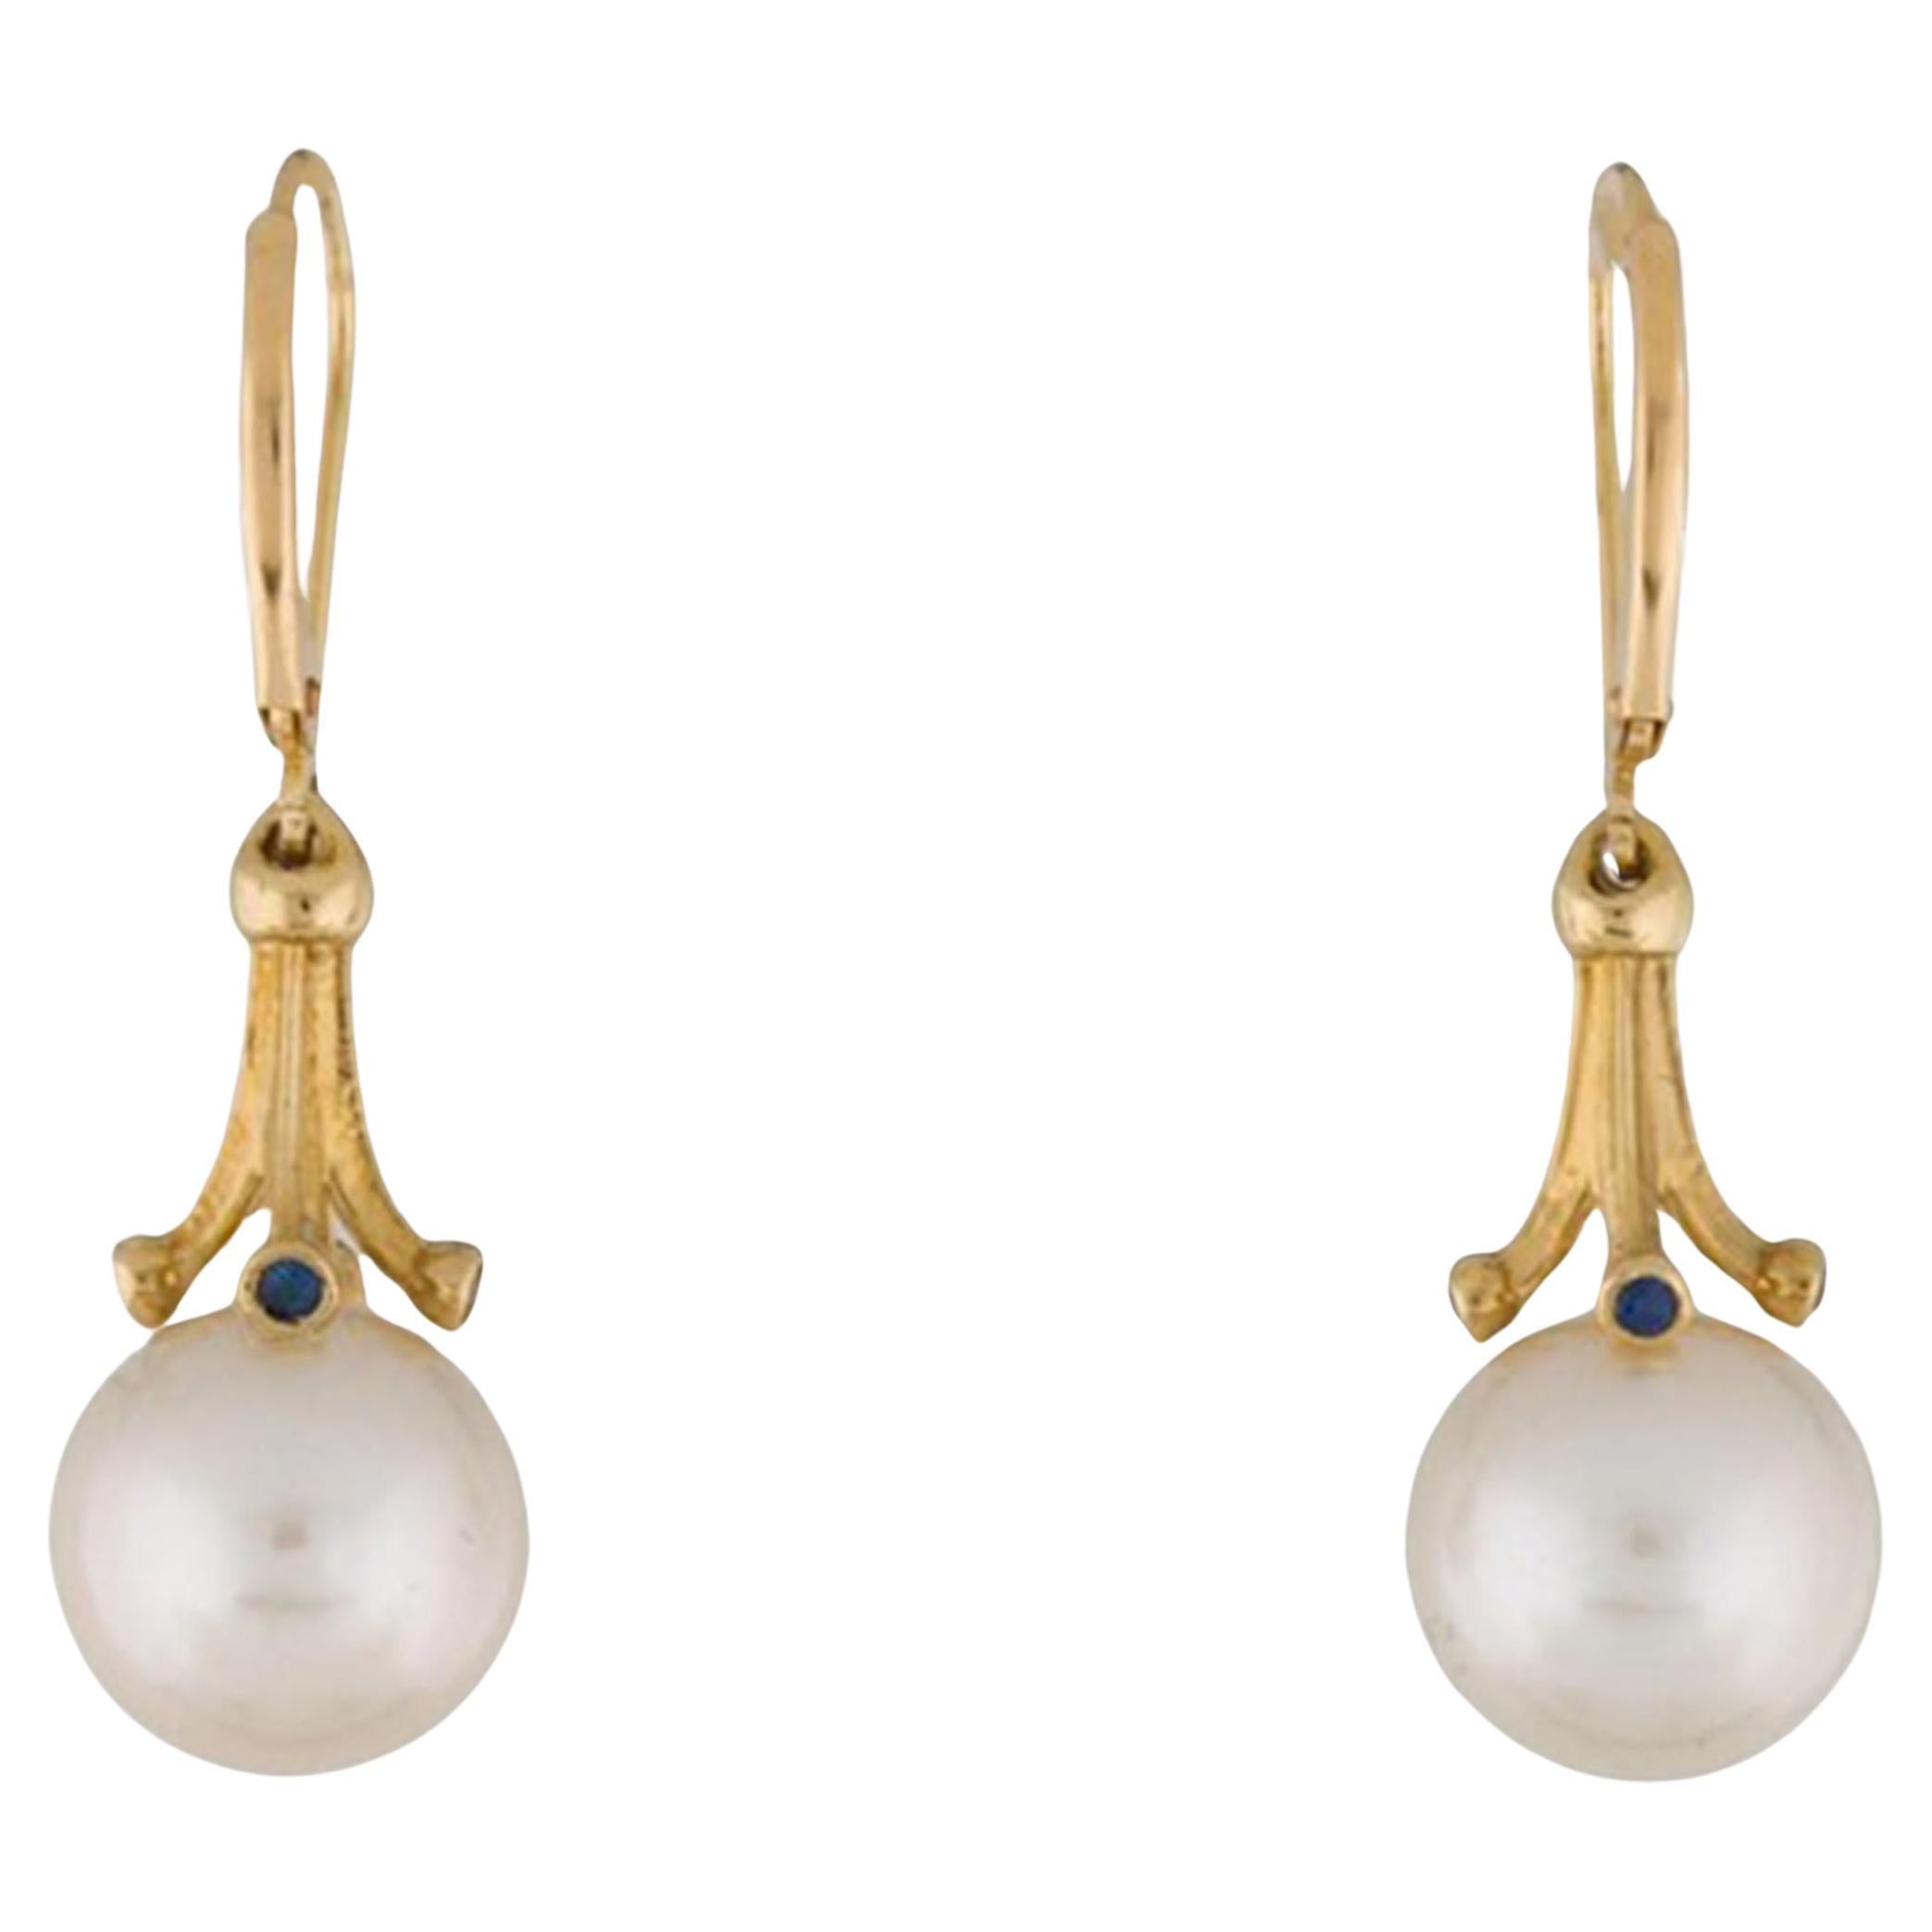     This is a beautiful 14K Yellow Gold Pearl and blue Sapphire Lever back Earrings. This pearl earring features a genuine cultured saltwater akoya pearl and round brilliant-cut sapphires. The pearls are round AAA 8.0 mm to 9 mm in size with 0.18ct